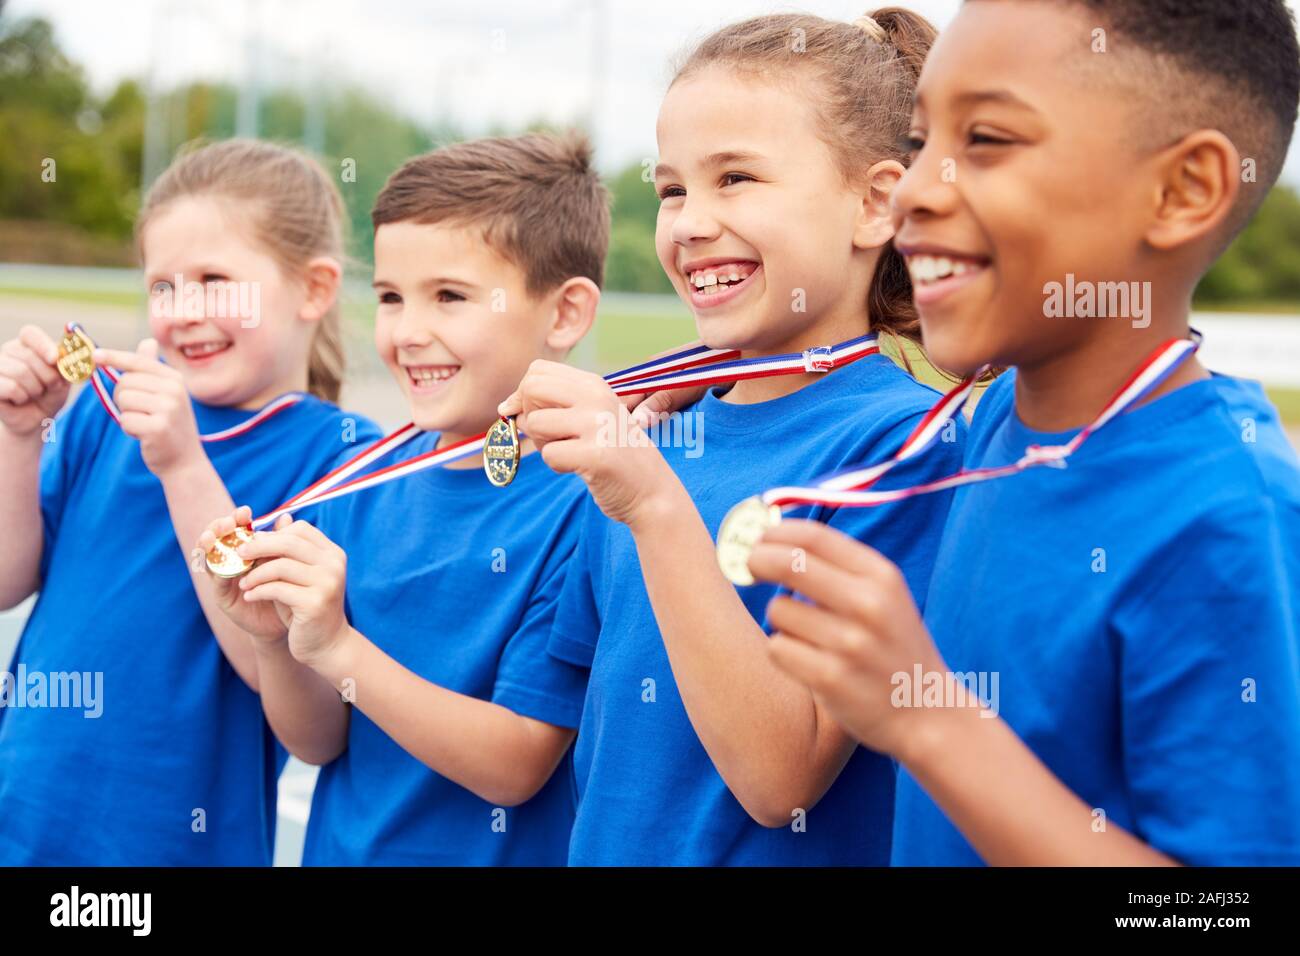 Children Showing Off Winners Medals On Sports Day Stock Photo